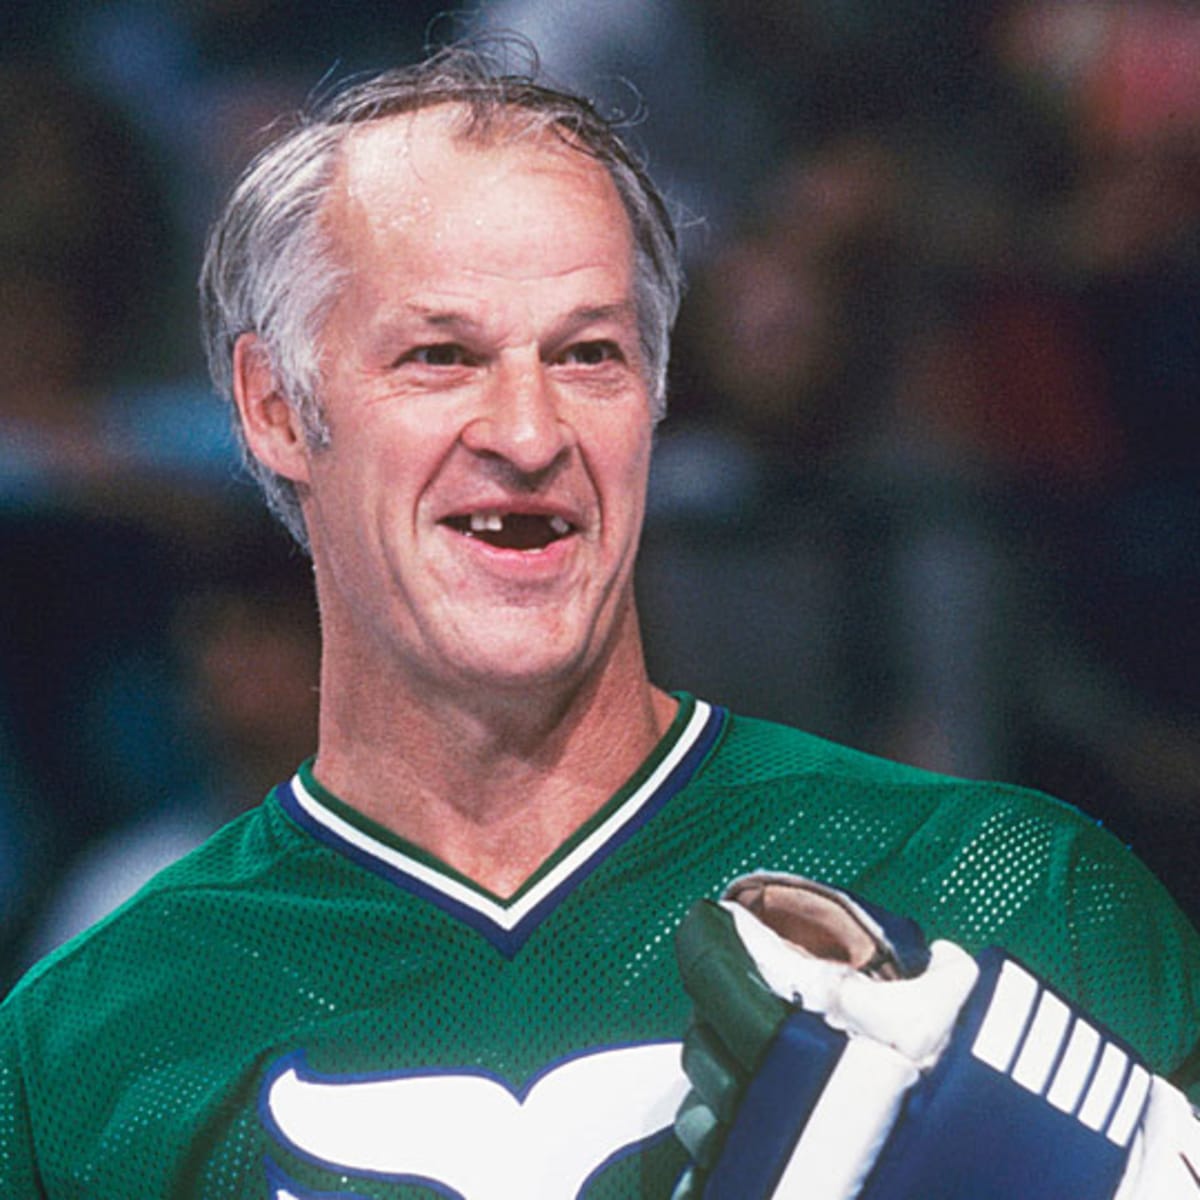 Vintage Gordie Howe photo shows off his amazing physique - The Hockey News